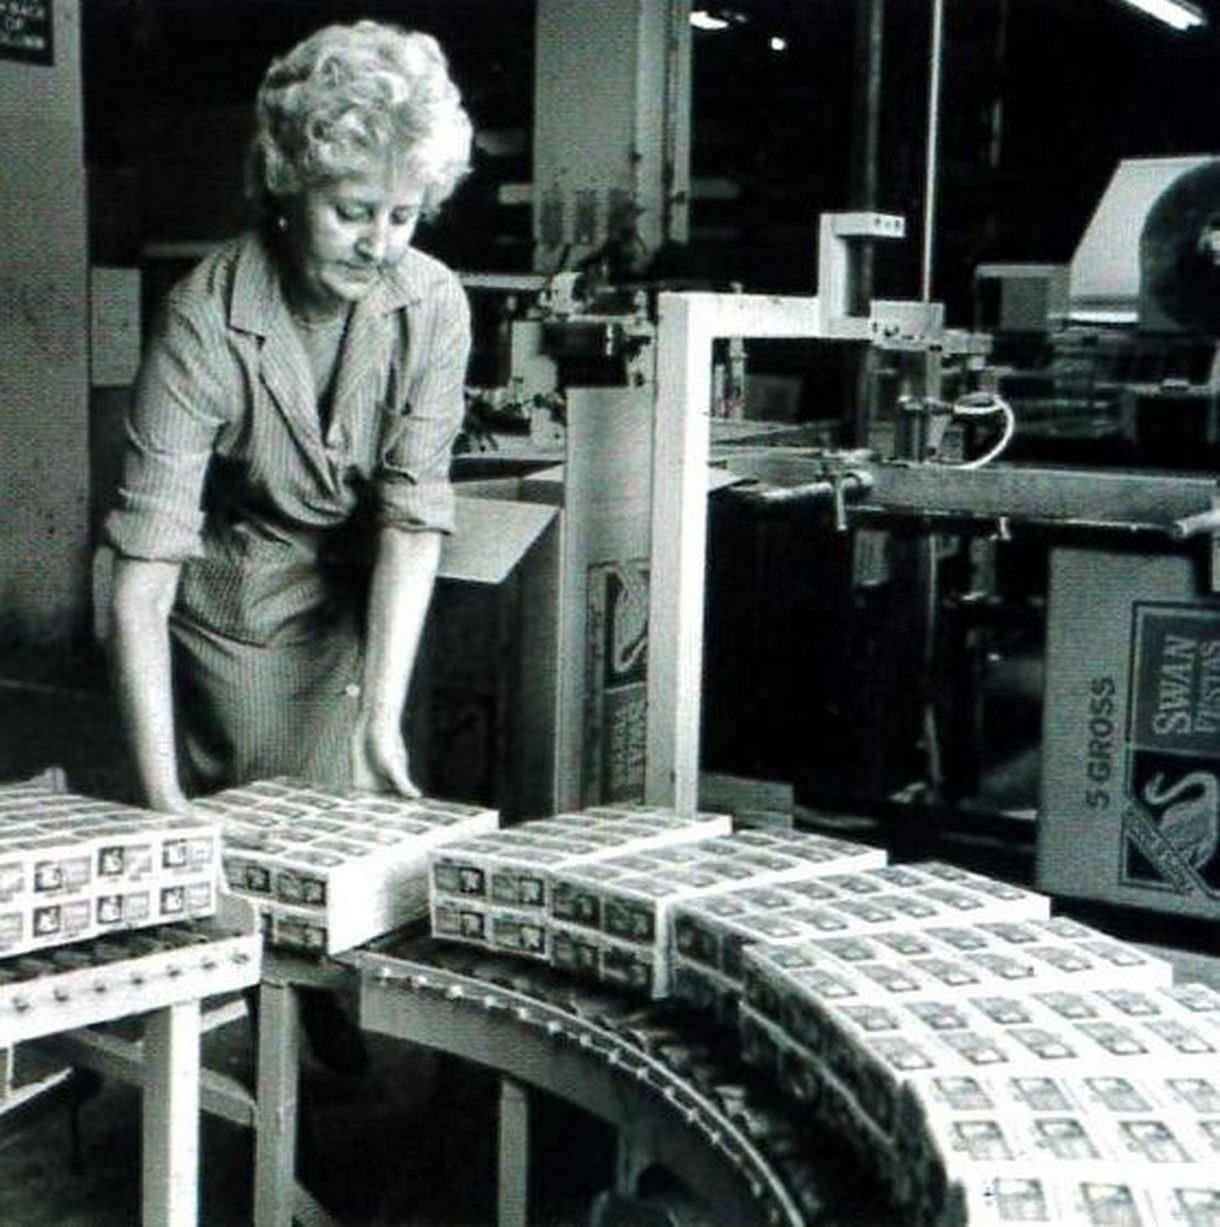 A match packer at work in the Bryant & May factory in Speke in 1980